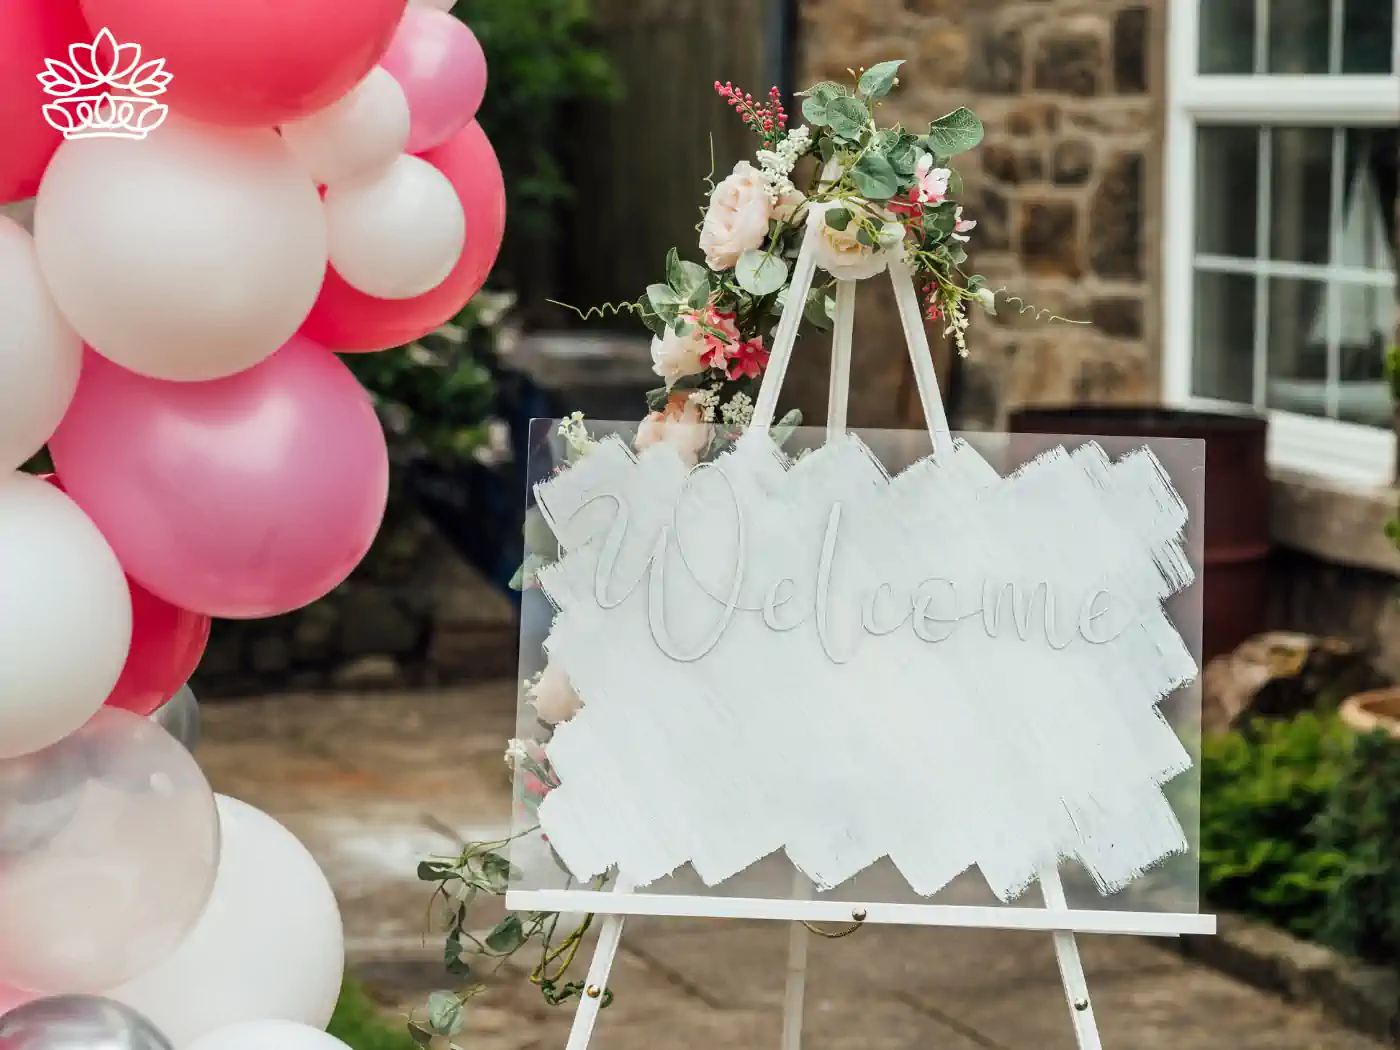 Welcome sign adorned with pink and white balloons and floral decorations, inviting guests to a baby shower celebration. Fabulous Flowers and Gifts: Baby Shower Flowers Collection